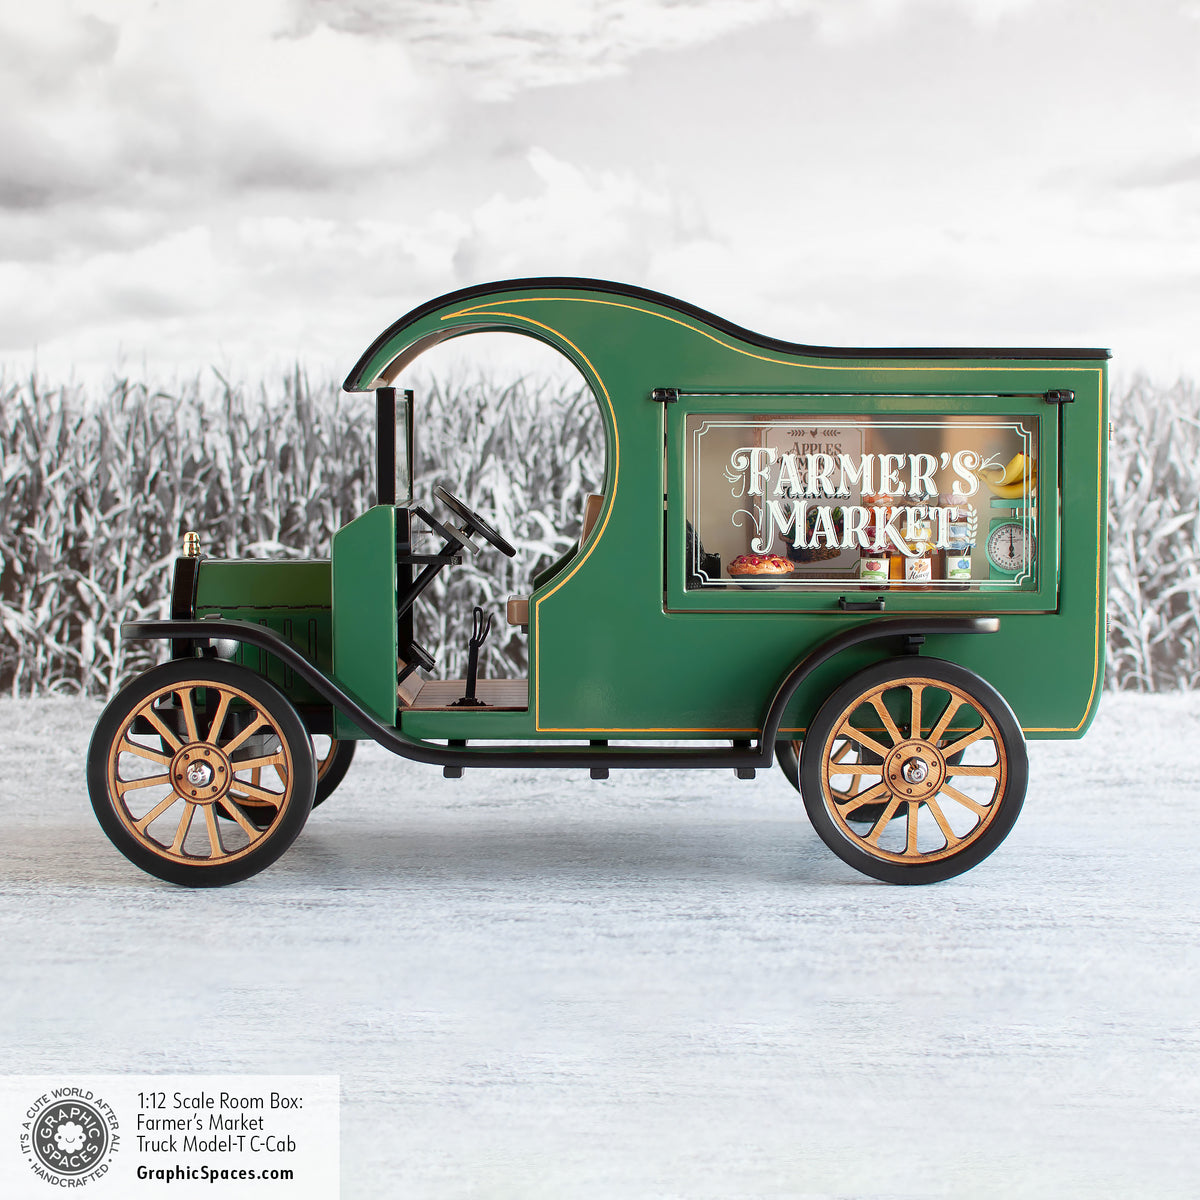 1:12 Scale Room Box Green Farmer&#39;s Market Truck Model T C cab. Driver side view. Counter display with window closed.